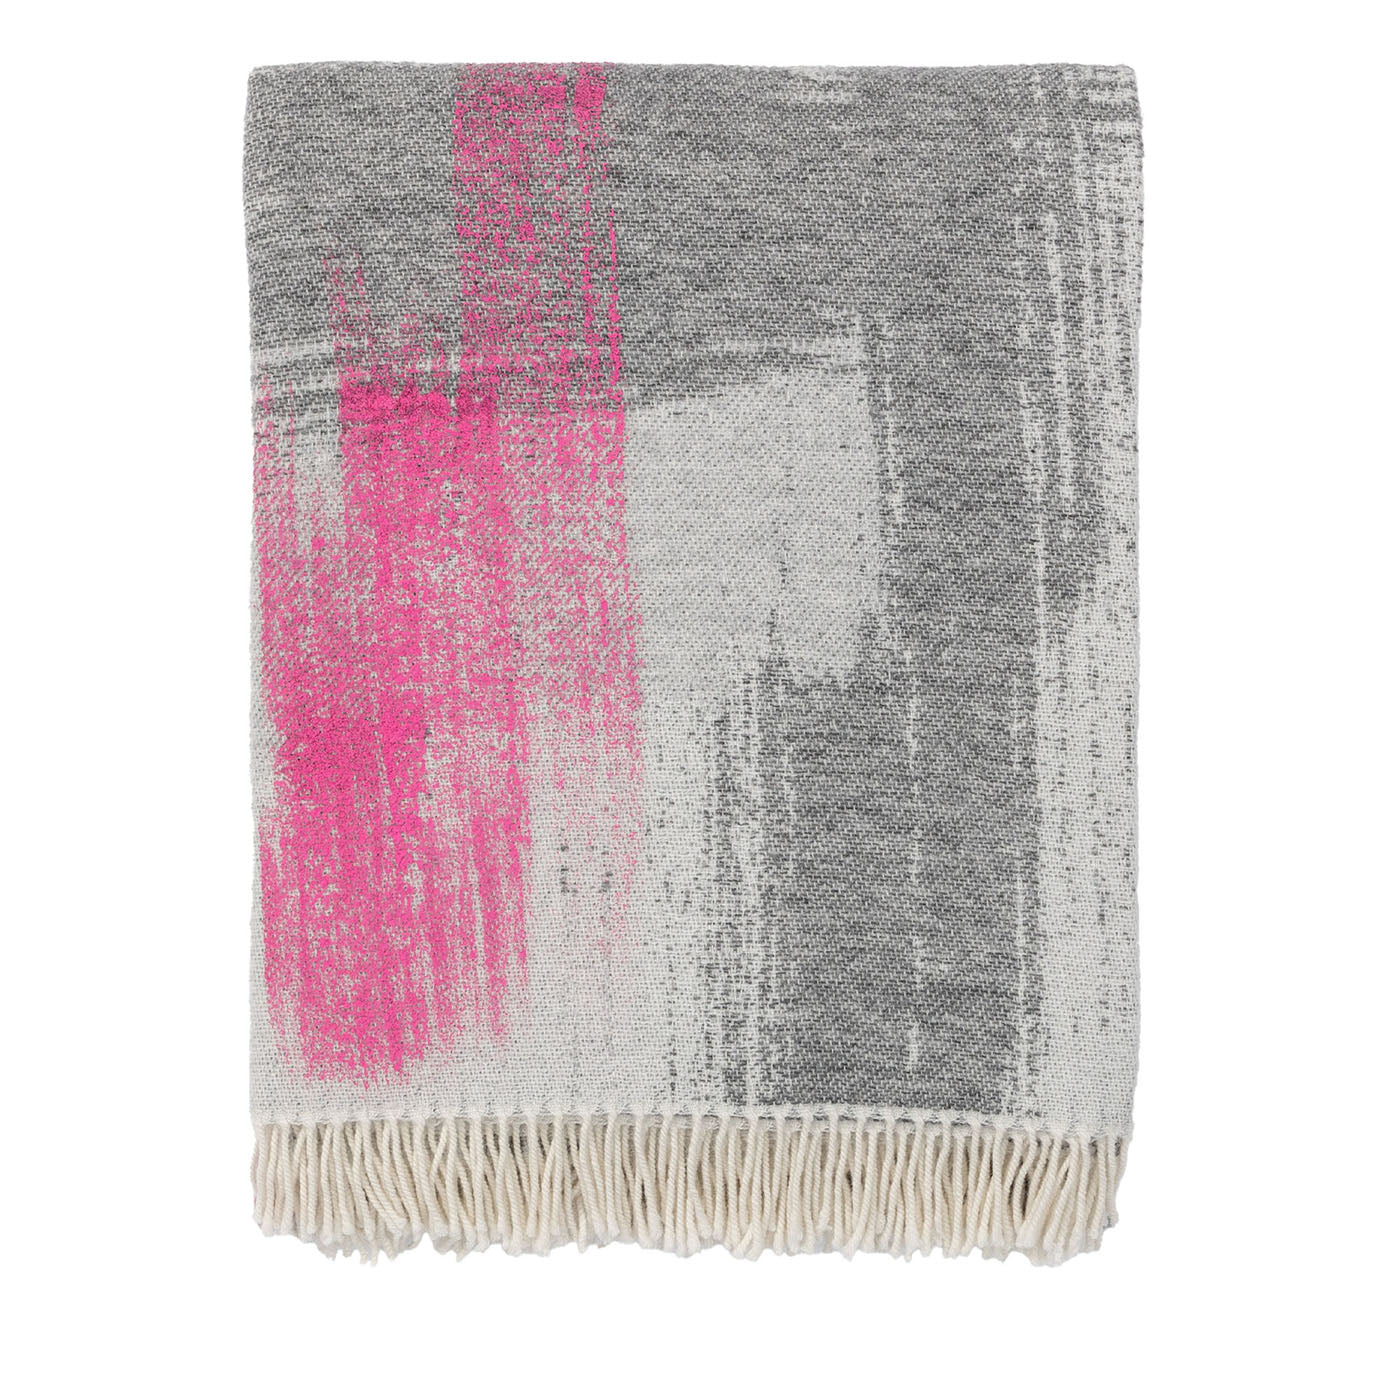 Painted Fringed Pink & Gray Blanket - Main view